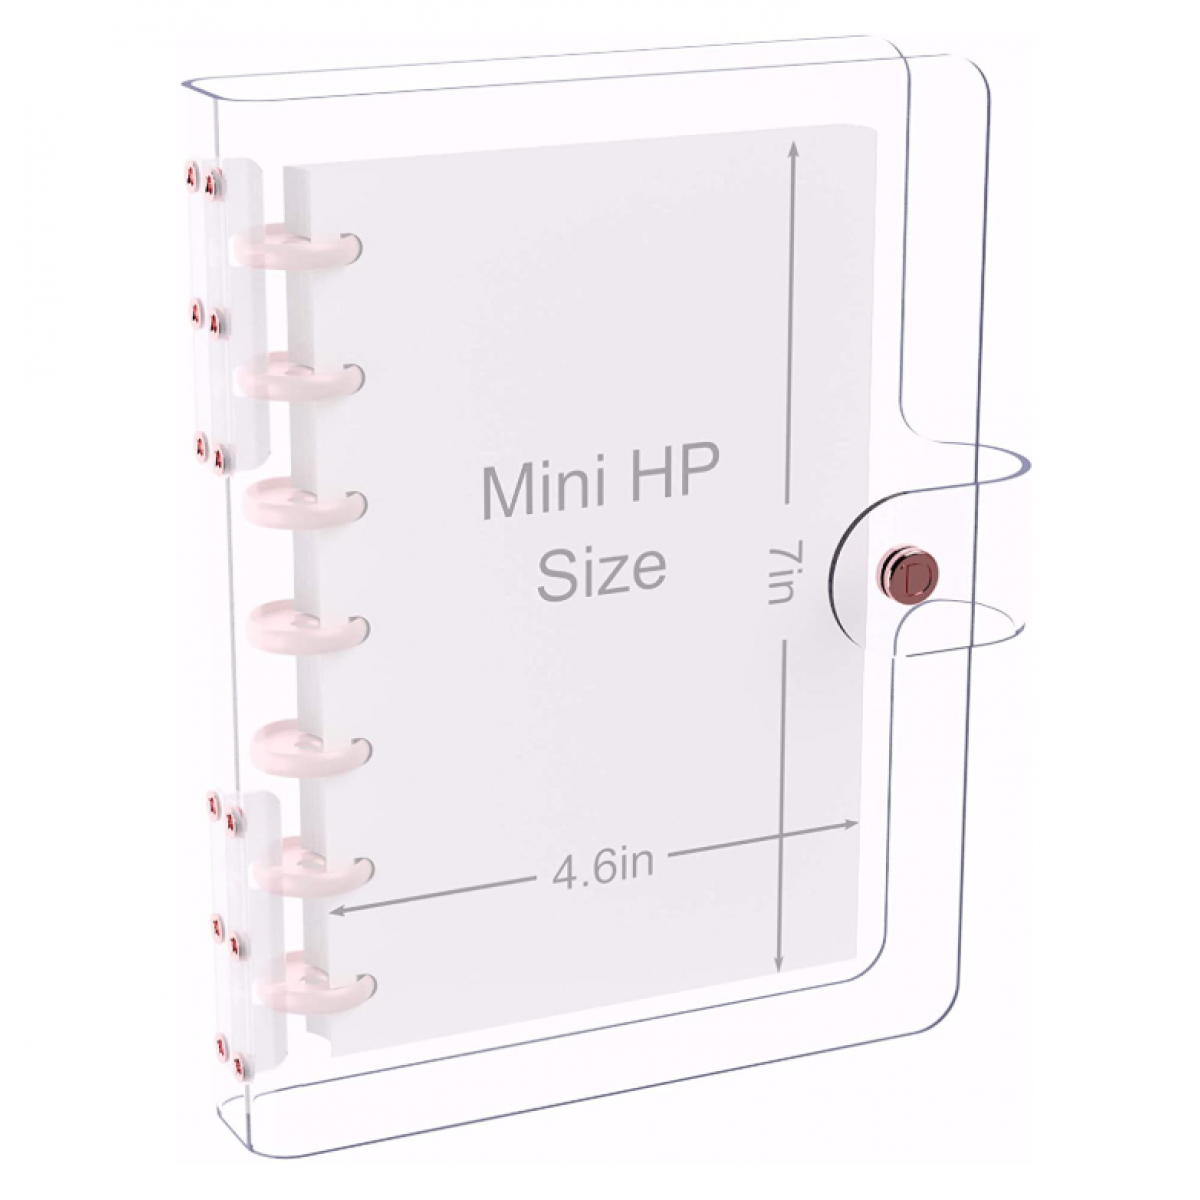 DISCAGENDA CLARITY CLEAR SEE THROUGH PVC PLANNER COVER - DISCBOUND ROSEGOLD, MINI HP SIZE